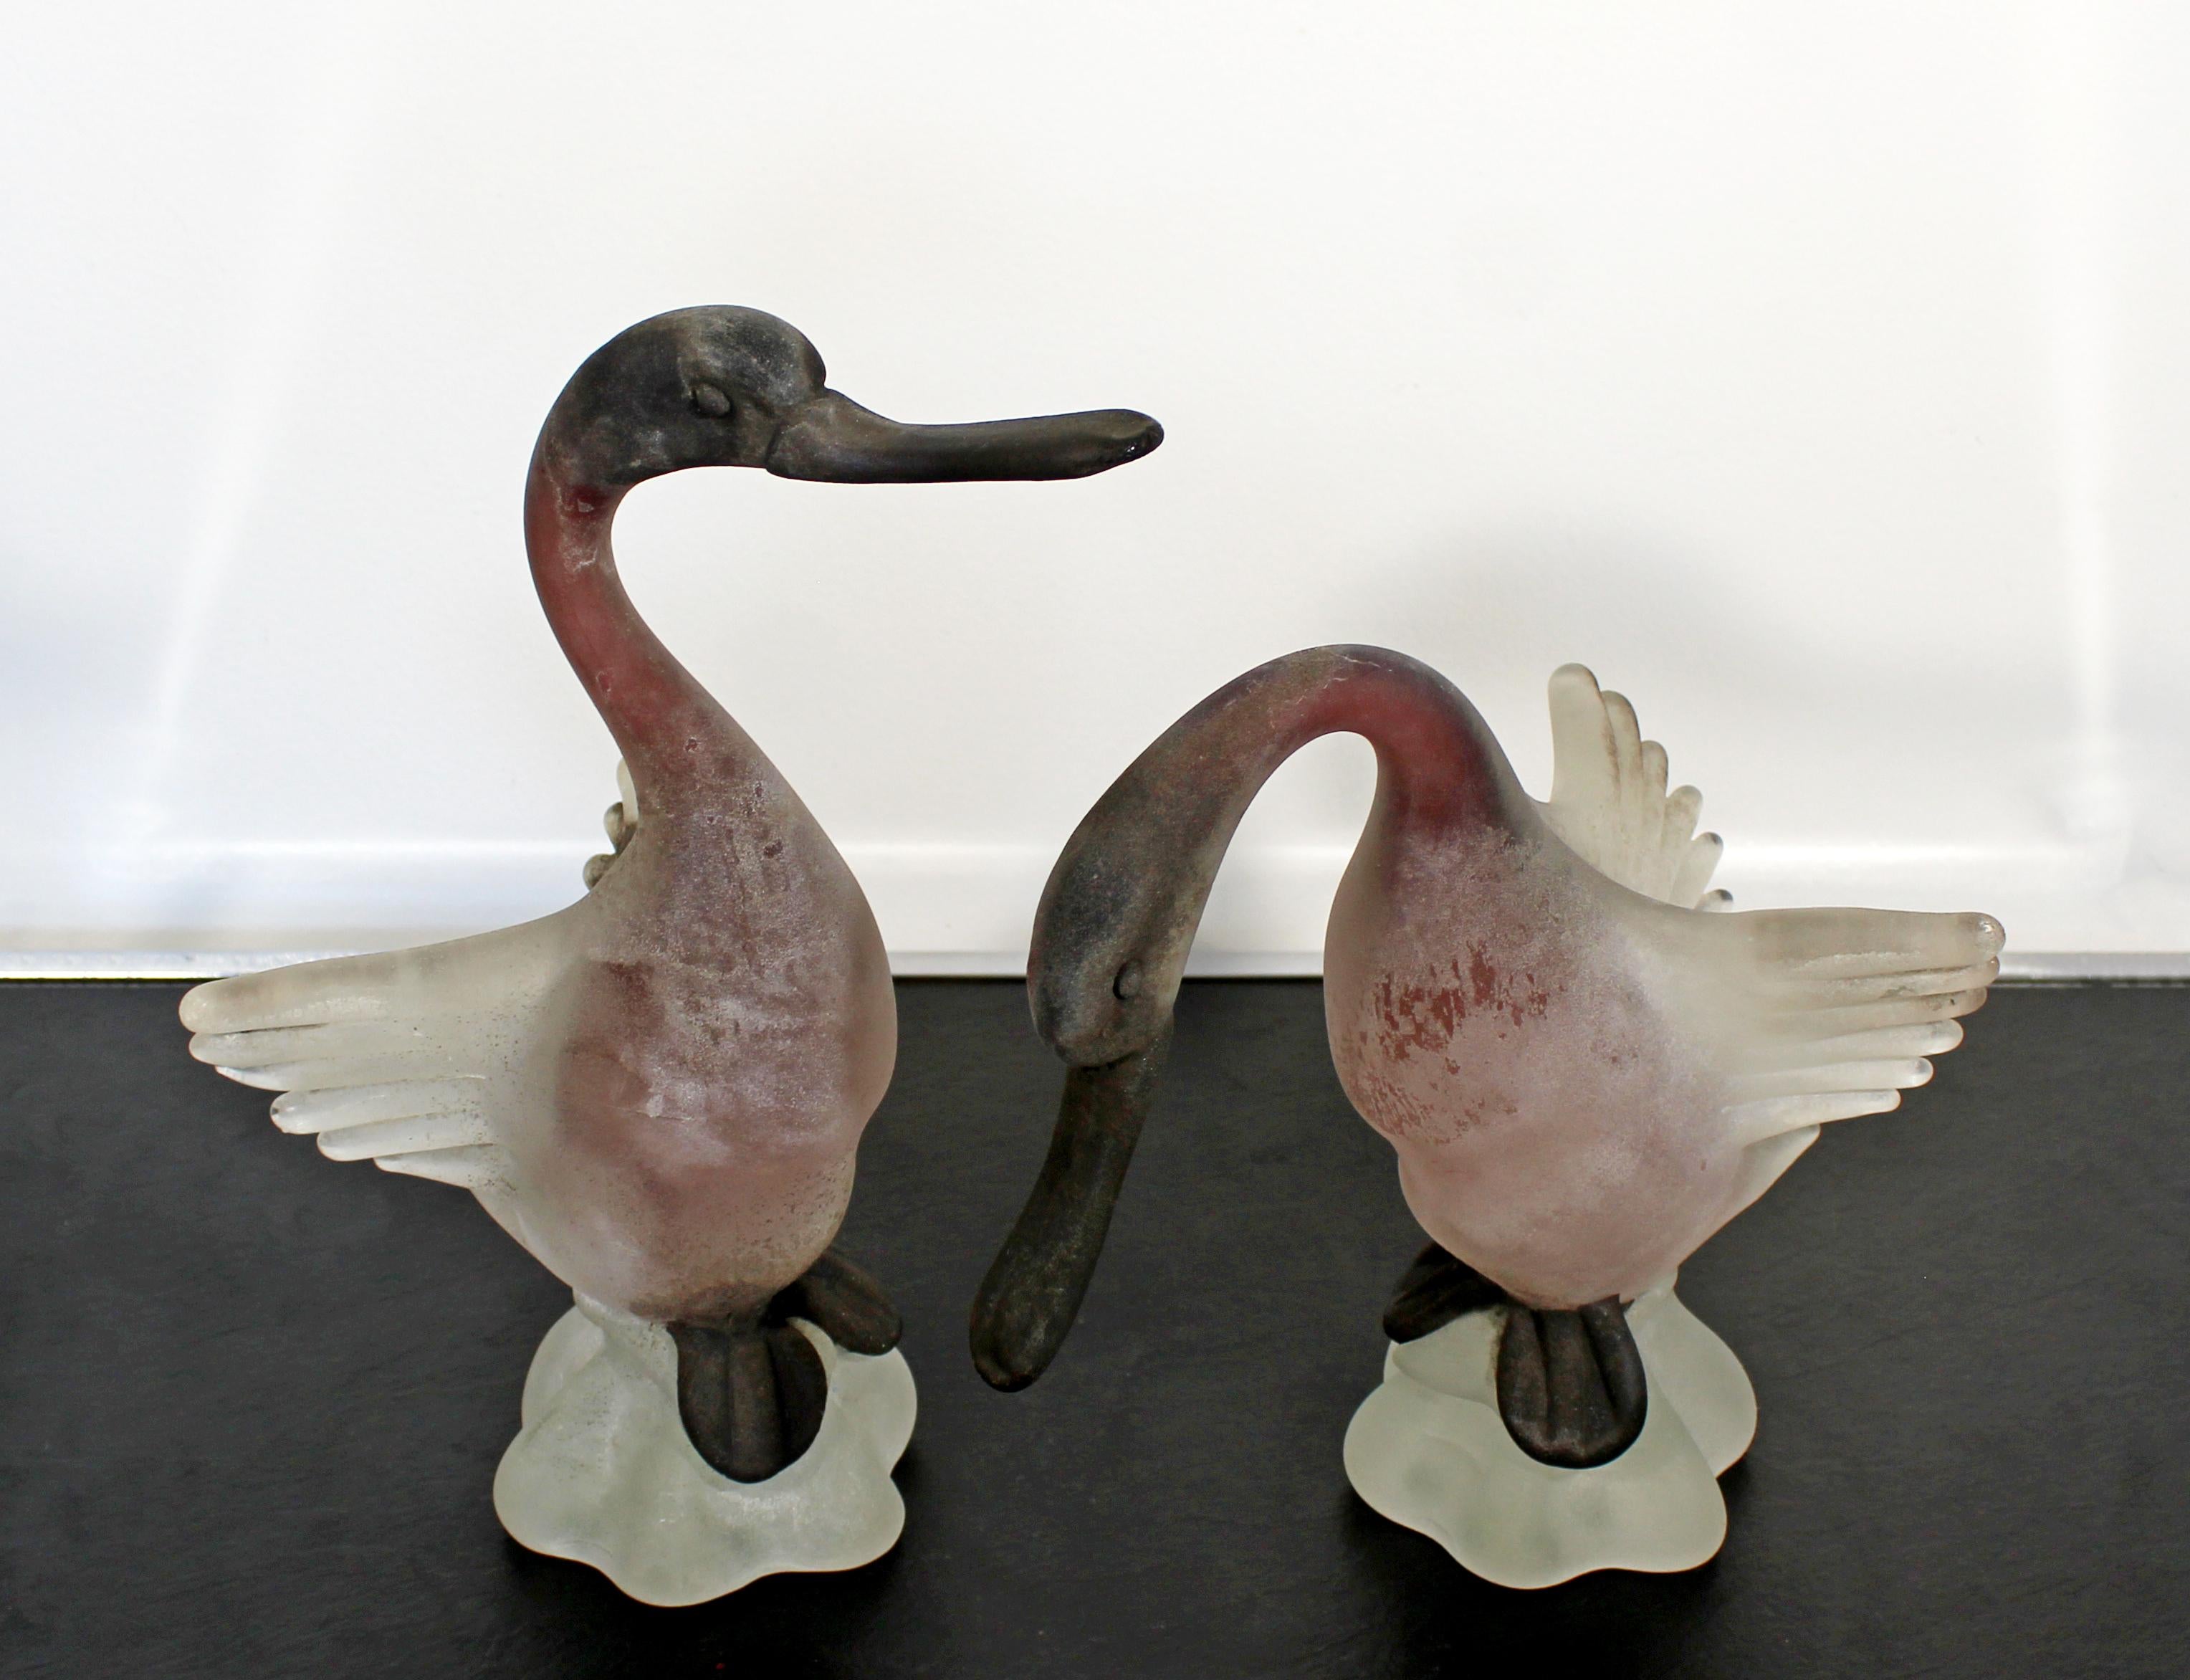 For your consideration is a gorgeous pair of Cenedese, Murano frosted glass table sculptures of geese. In excellent condition. The dimensions are 11